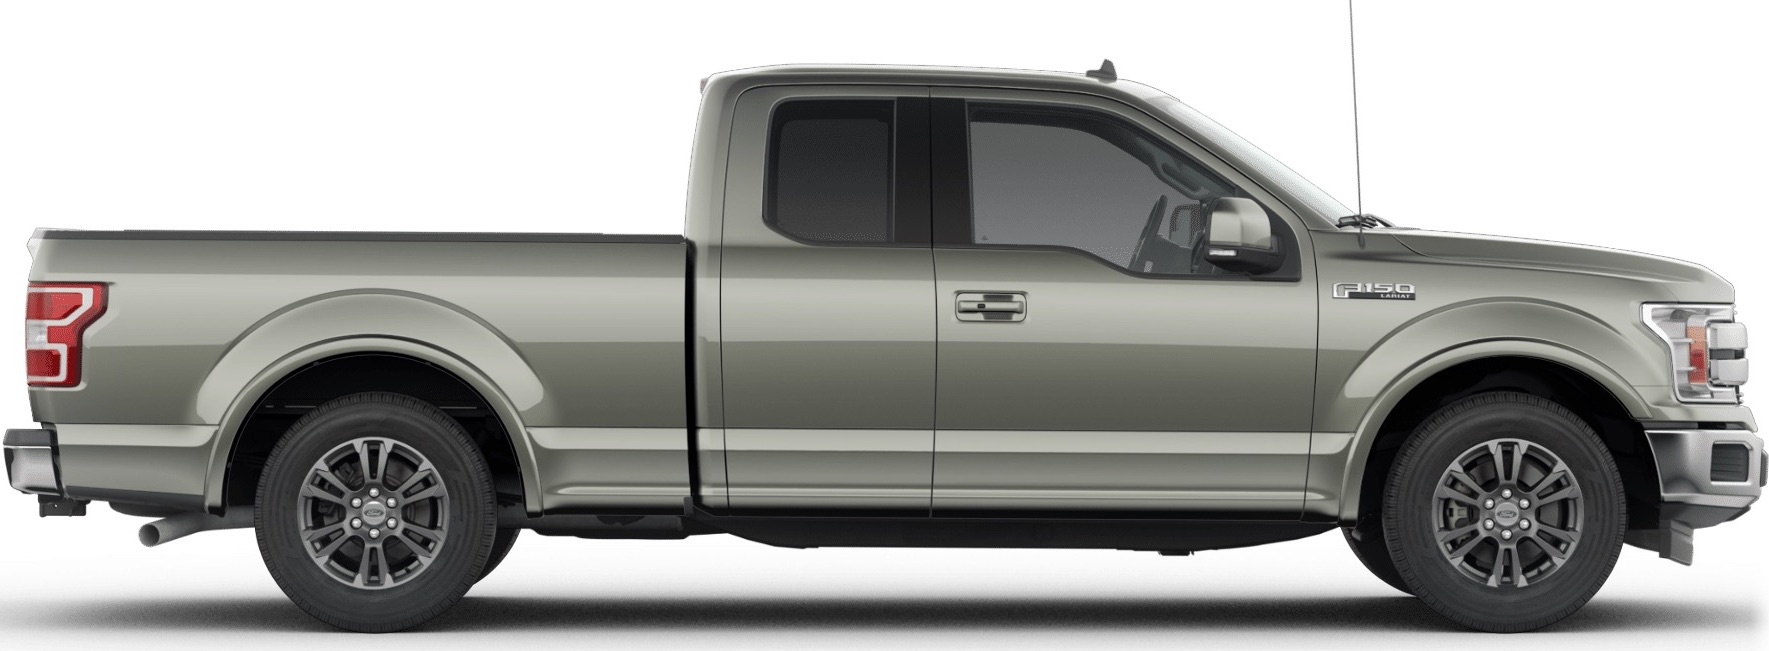 2020 Ford Truck Color Chart